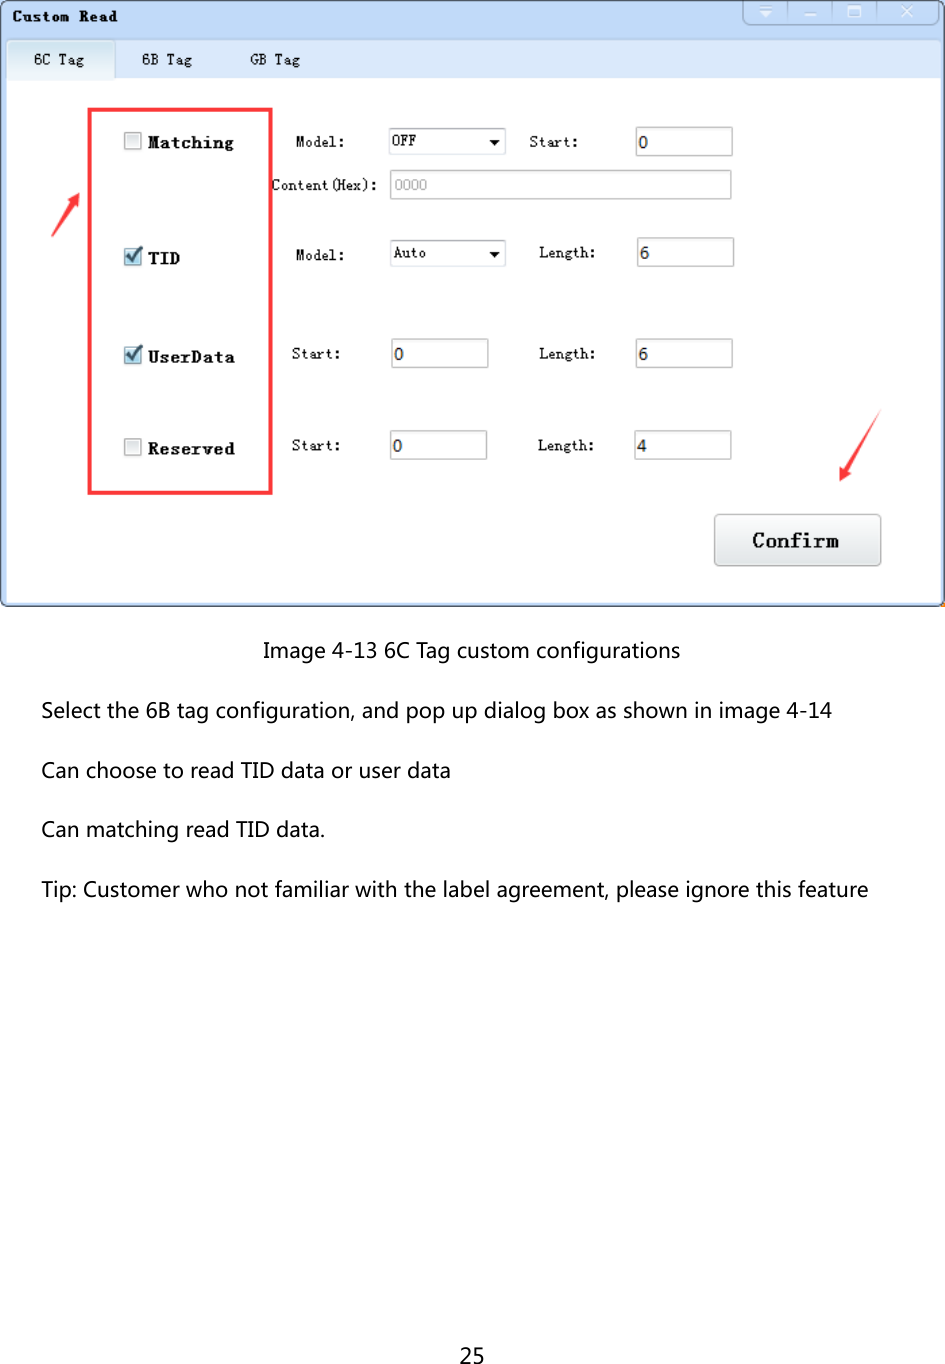  25    Image 4-13 6C Tag custom configurations Select the 6B tag configuration, and pop up dialog box as shown in image 4-14 Can choose to read TID data or user data Can matching read TID data. Tip: Customer who not familiar with the label agreement, please ignore this feature 